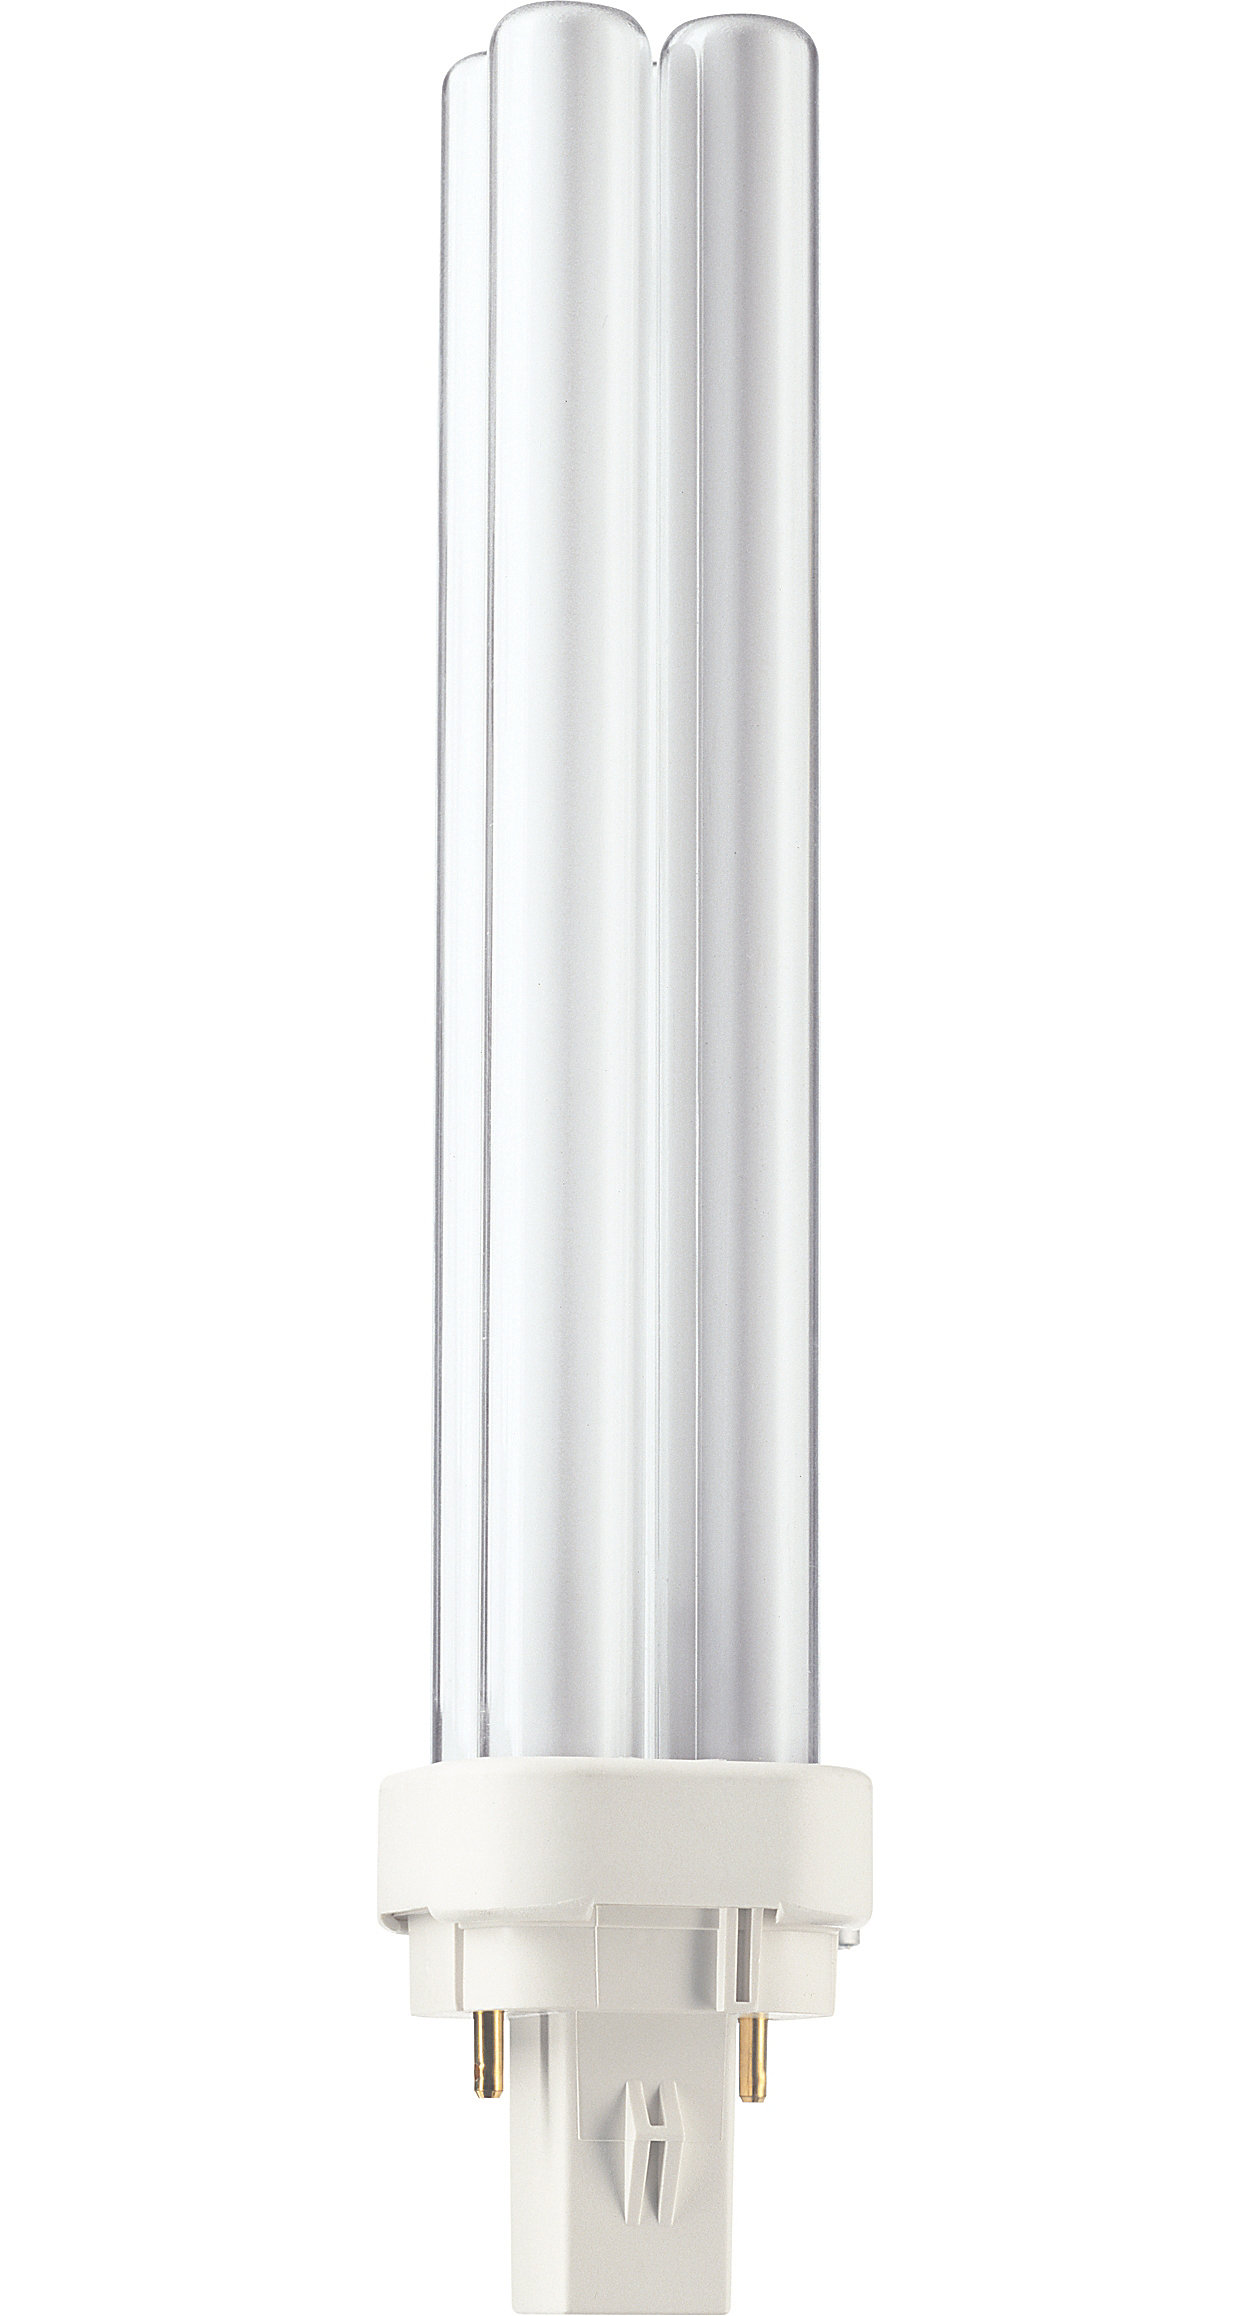 High Color Rendering, High Efficacy, Long Life Lamps